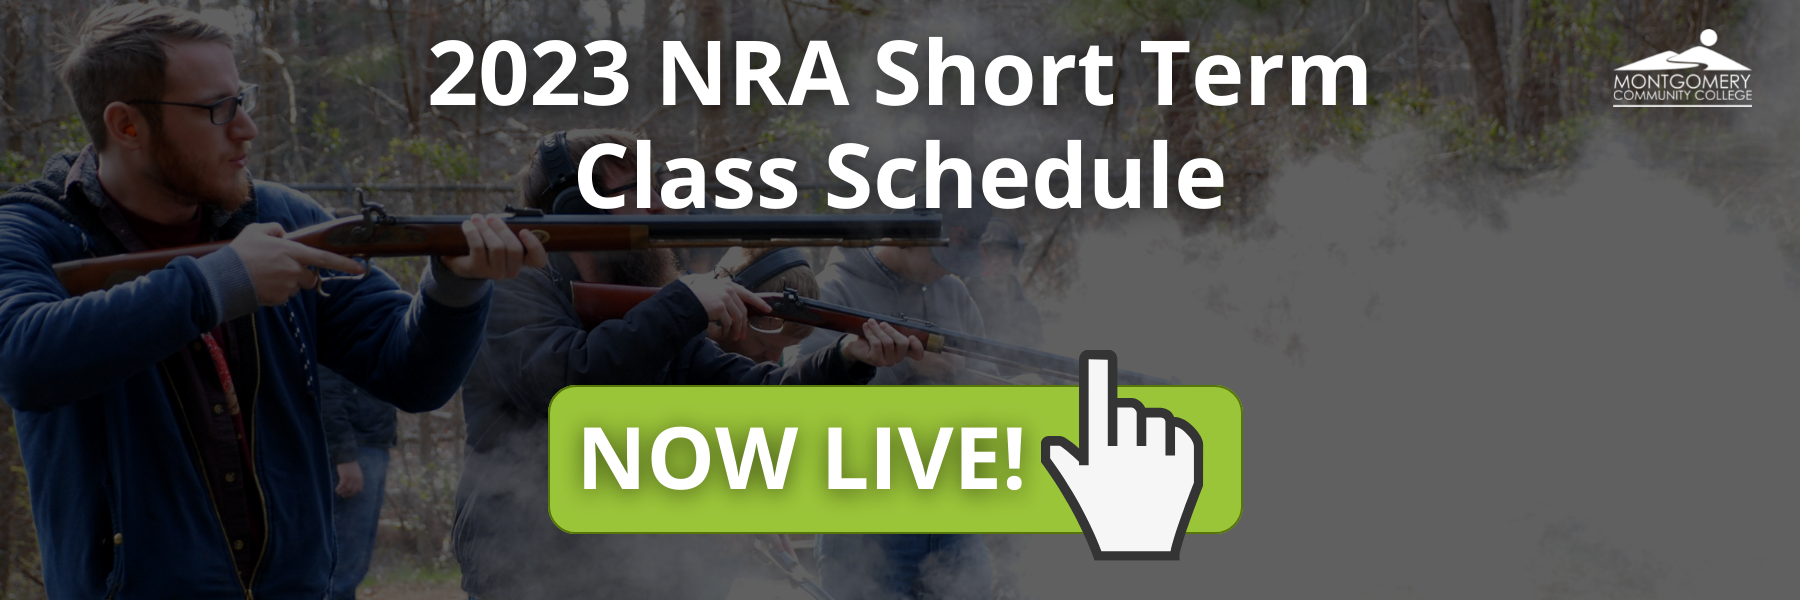 2023 NRA Short Term Class Schedule. Now Live! Students shooting guns in background